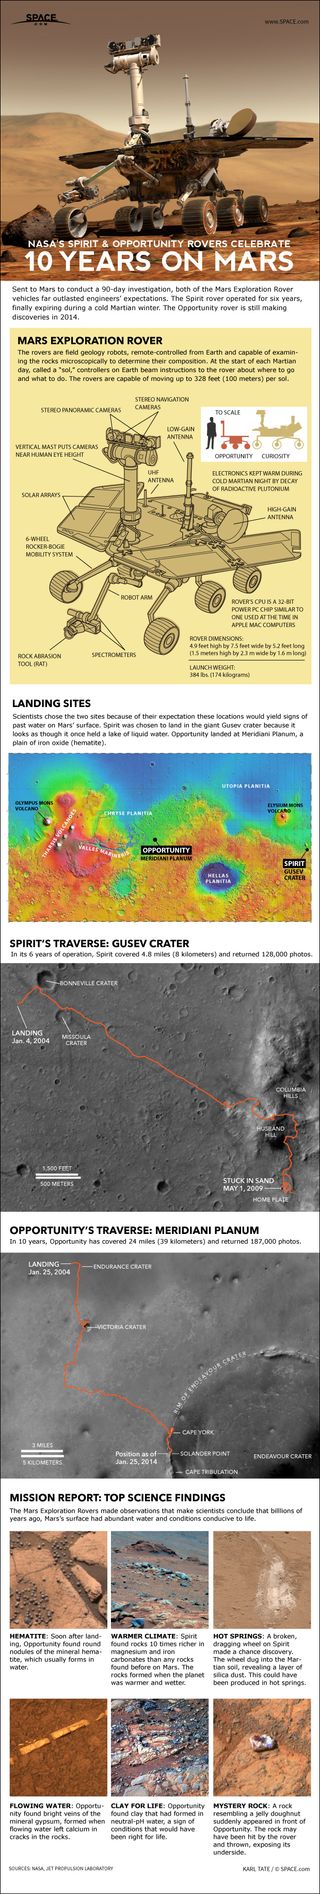 How the Spirit and Opportunity Mars rovers work.